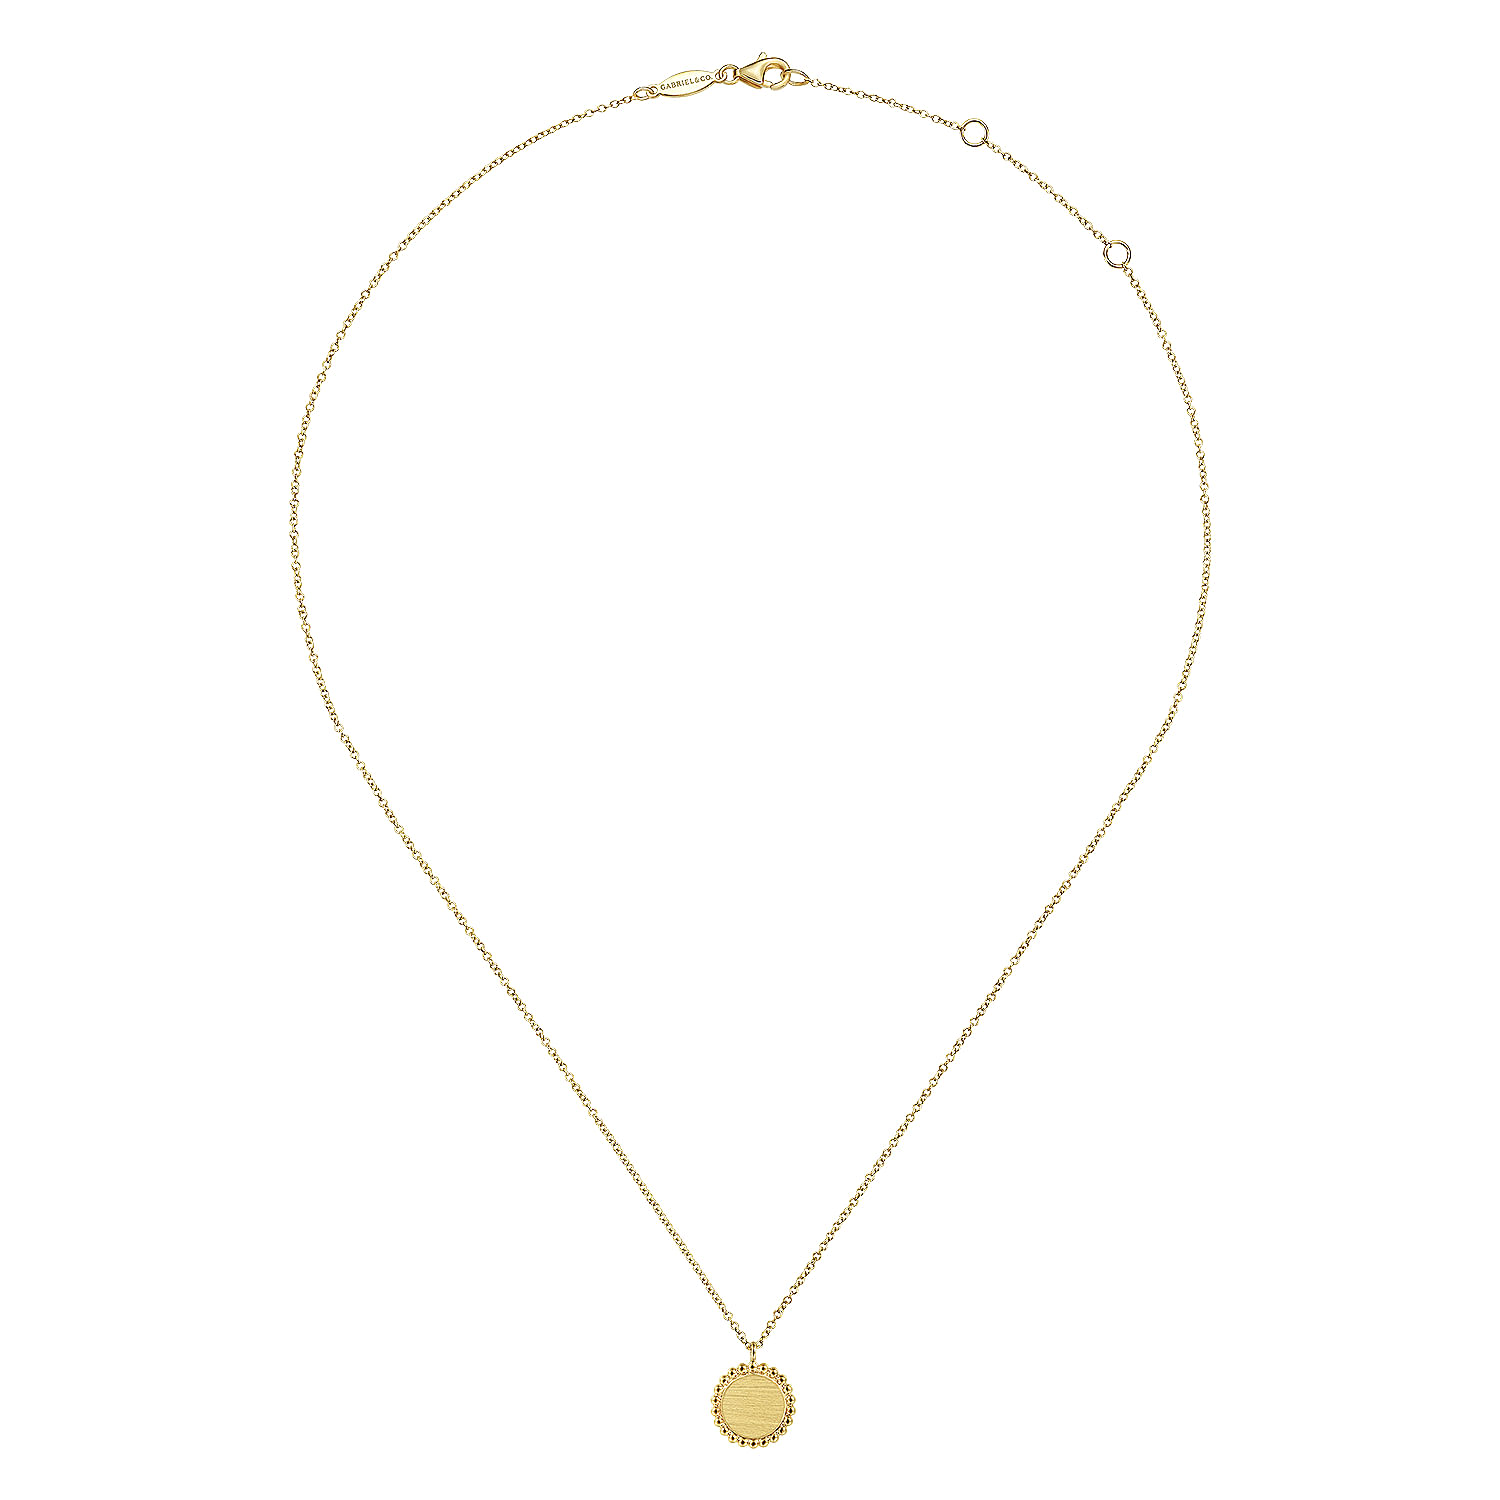 14K Yellow Gold Round Pendant Necklace with Bujukan Bead Frame